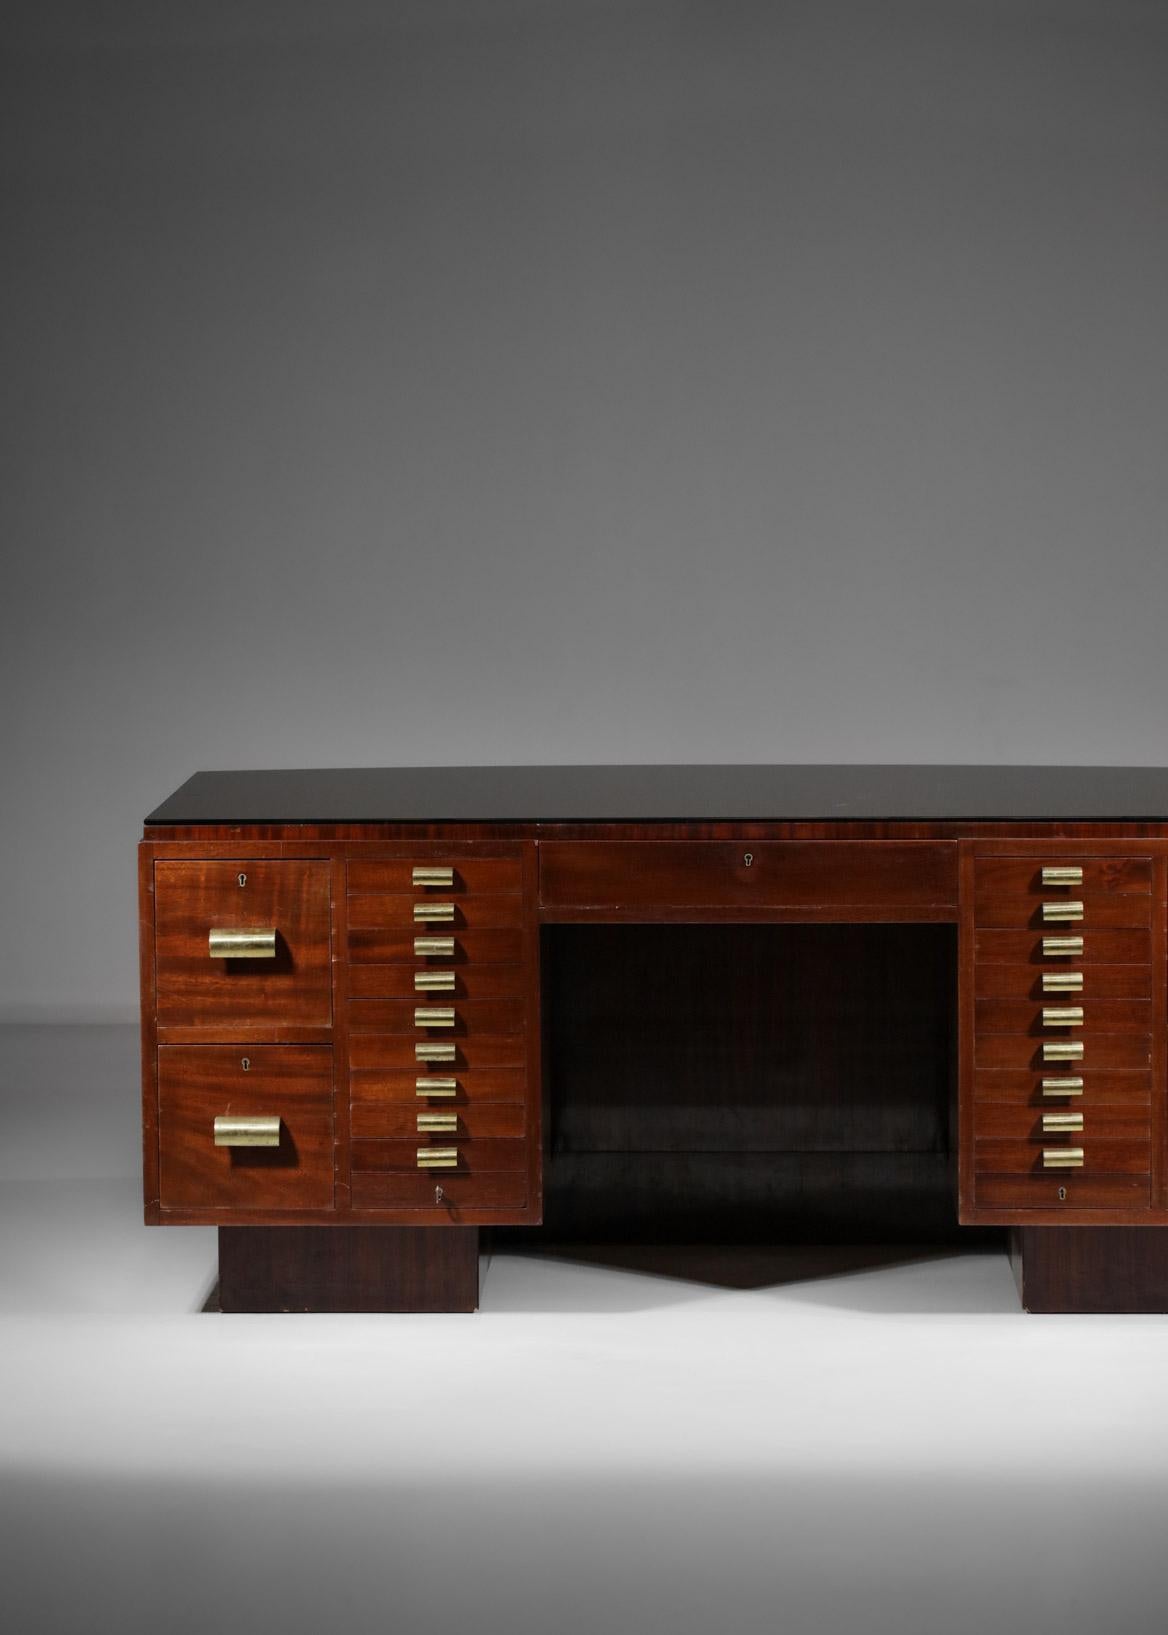 Imposing 1940's French Modernist Desk in Mahogany in Style of Dupré Lafon, E498 For Sale 12